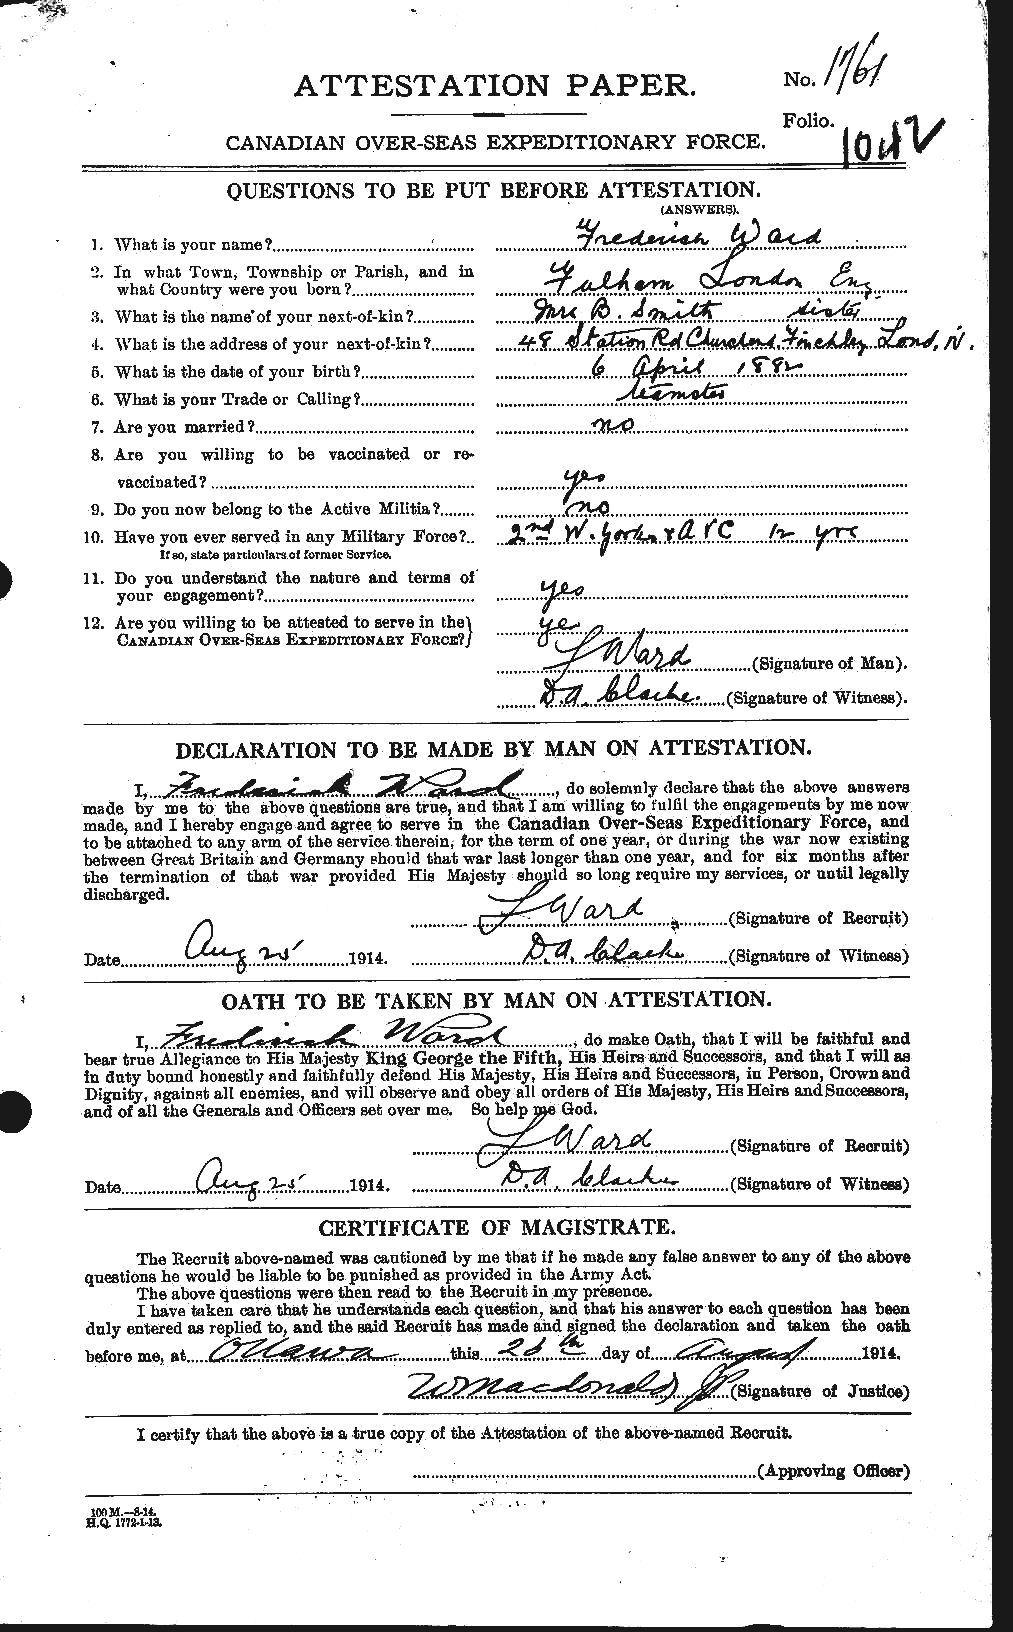 Personnel Records of the First World War - CEF 657720a